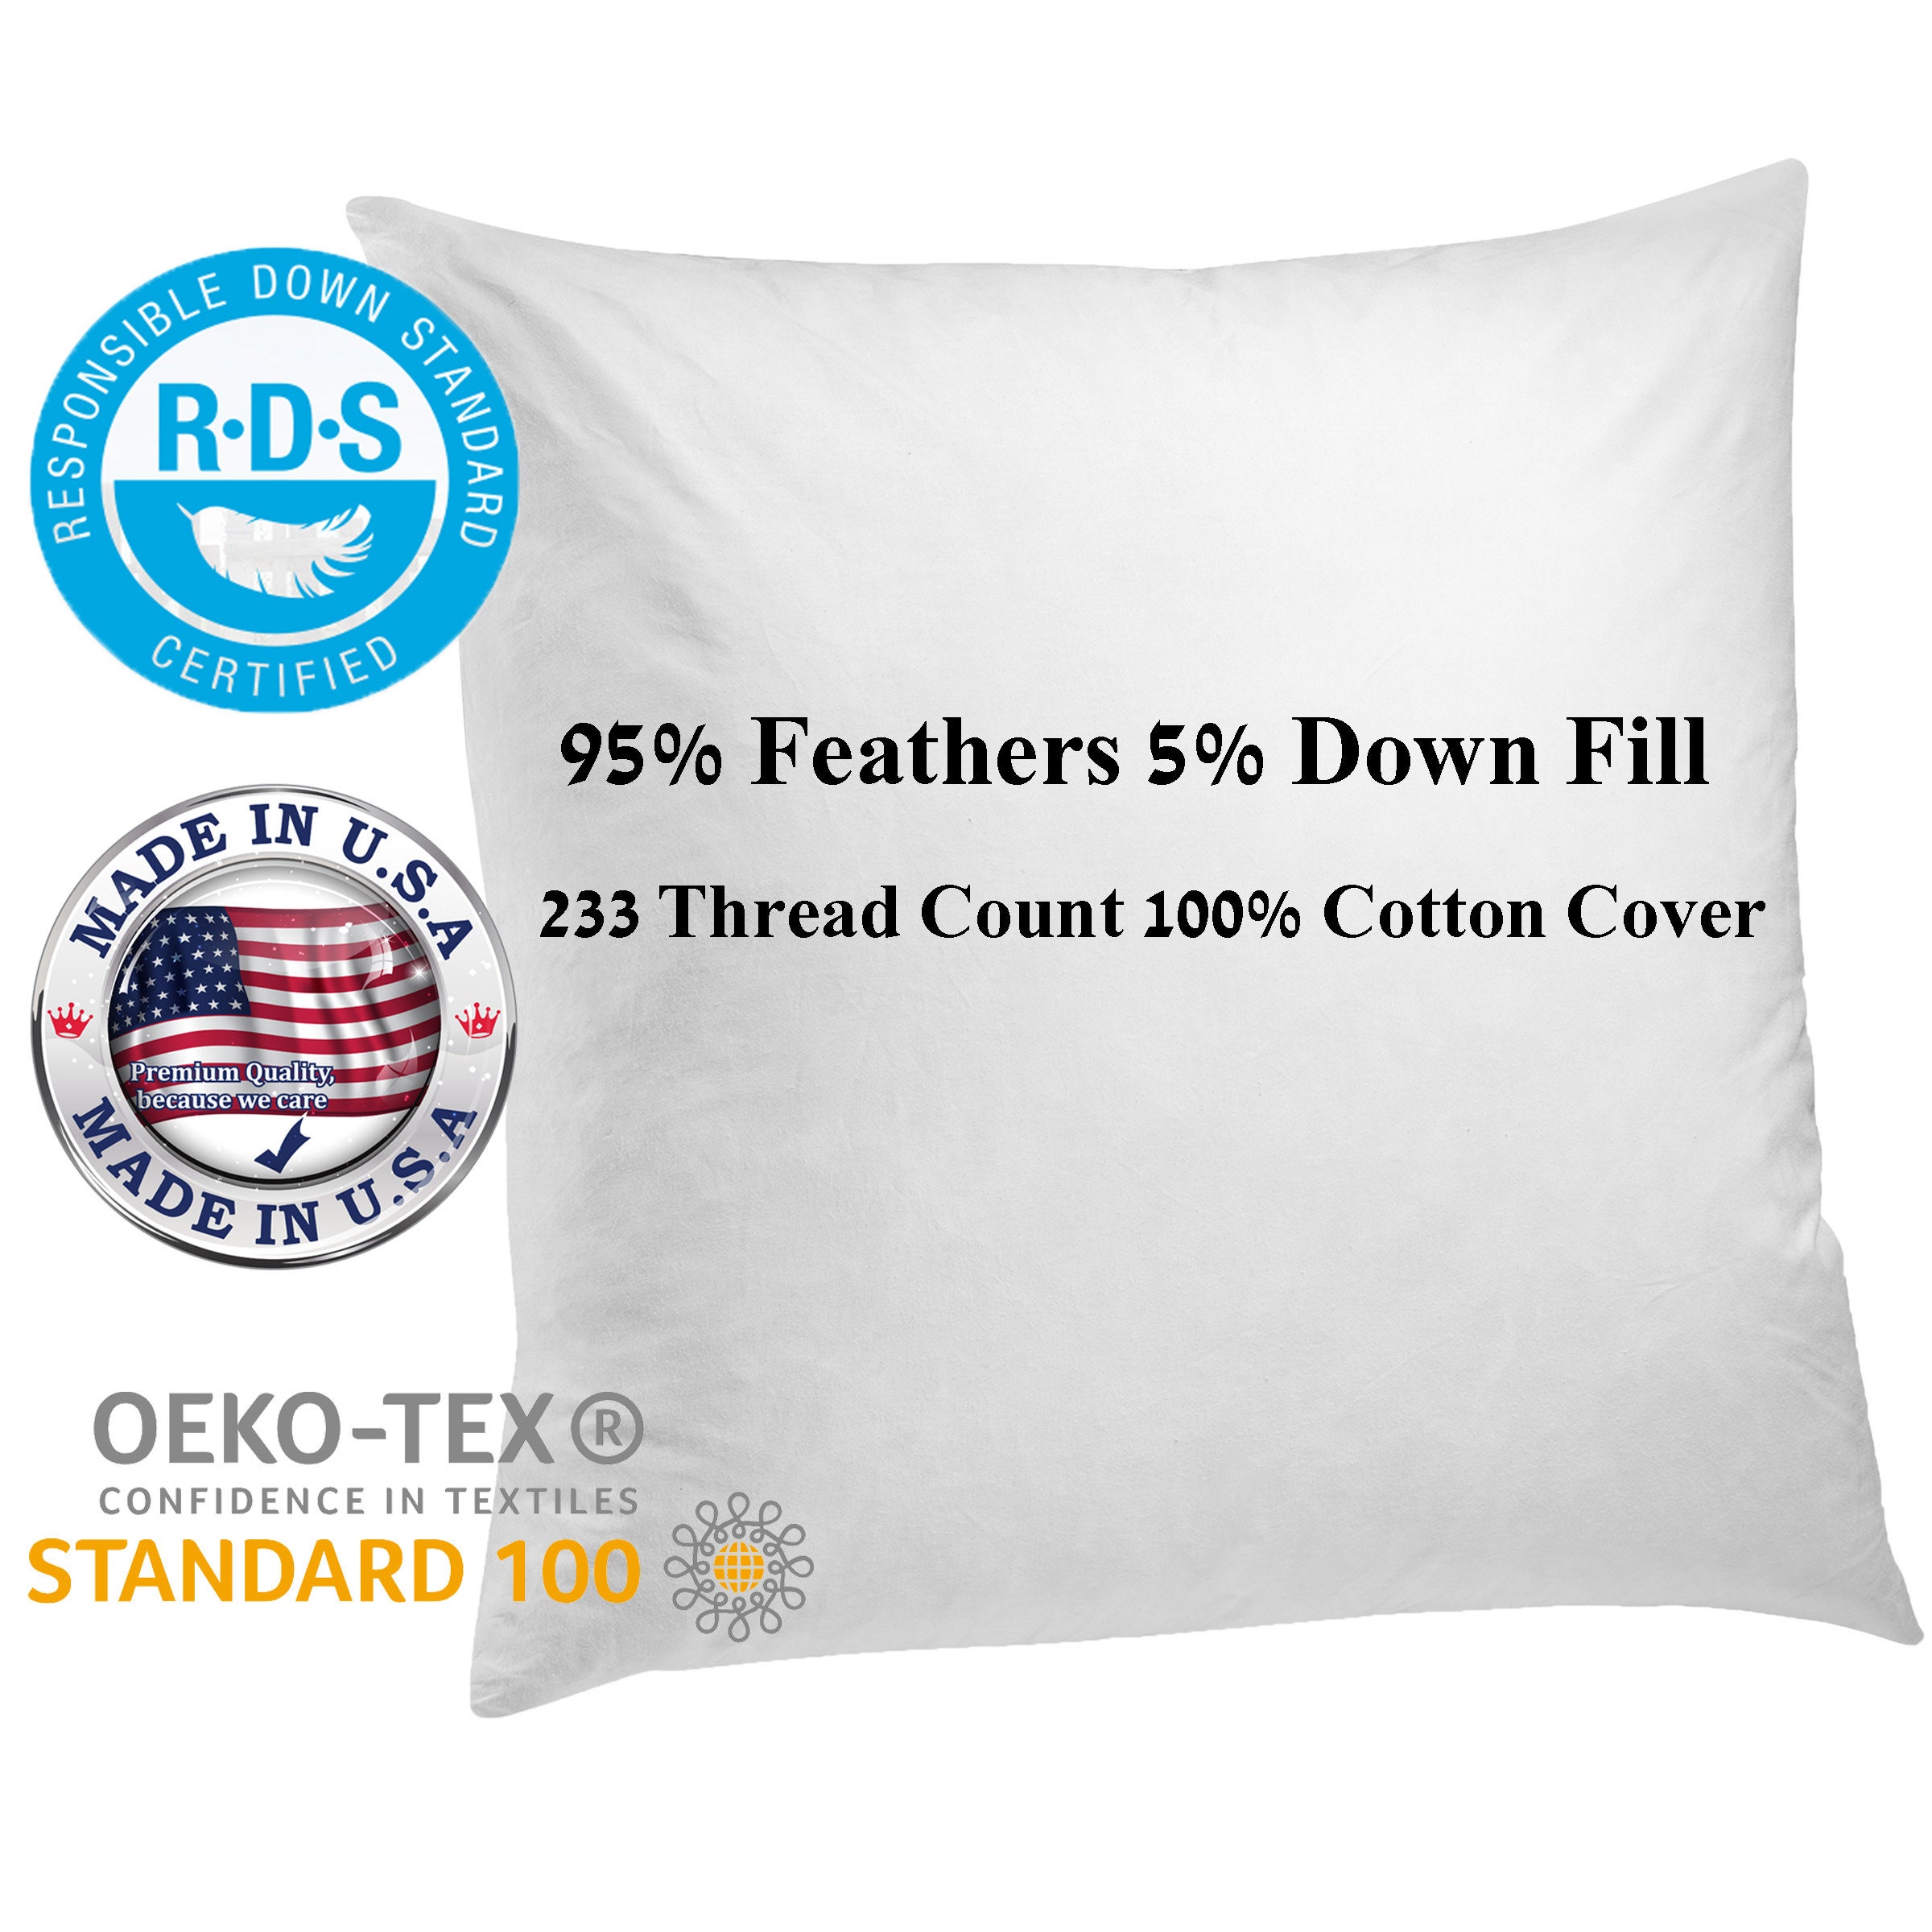 Decorative Throw Pillow Insert, Down and Feathers Fill, 100% Cotton Cover  233 Thread Count, Square Pillow Insert - Made in USA (14x14) 